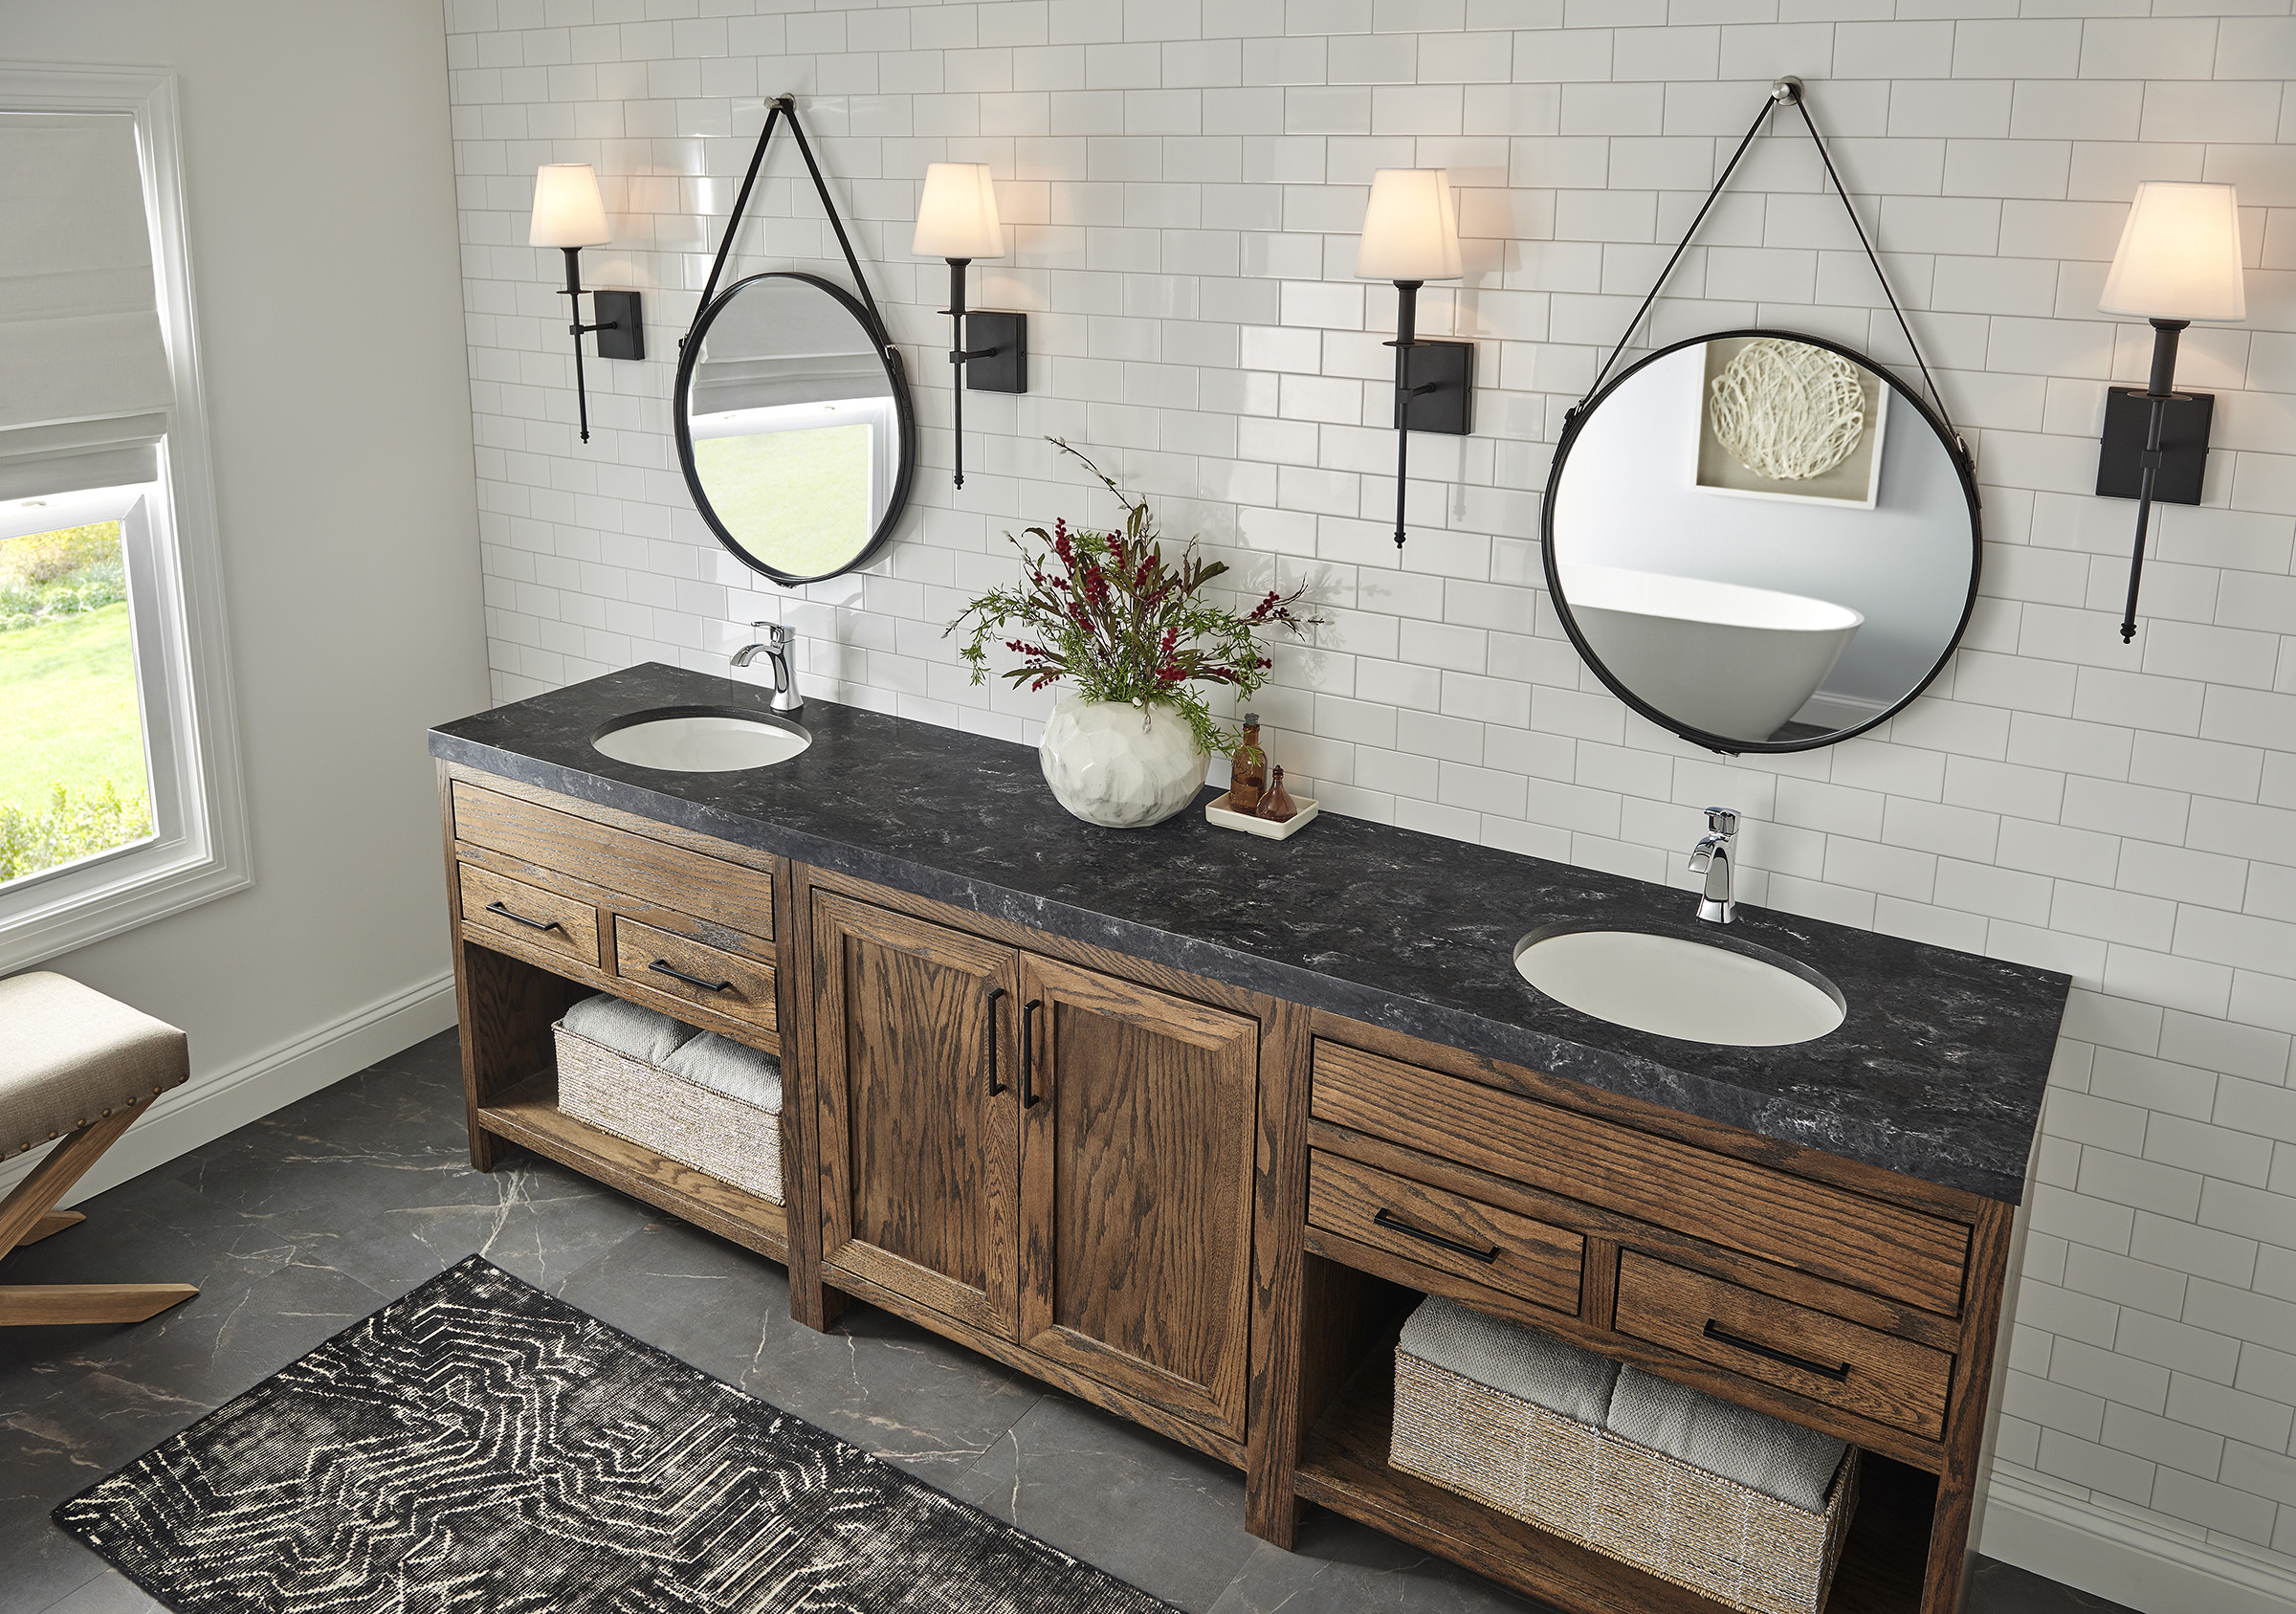 Transform your primary bathroom into a luxurious sanctuary with inventive design concepts for style, comfort, and functionality.